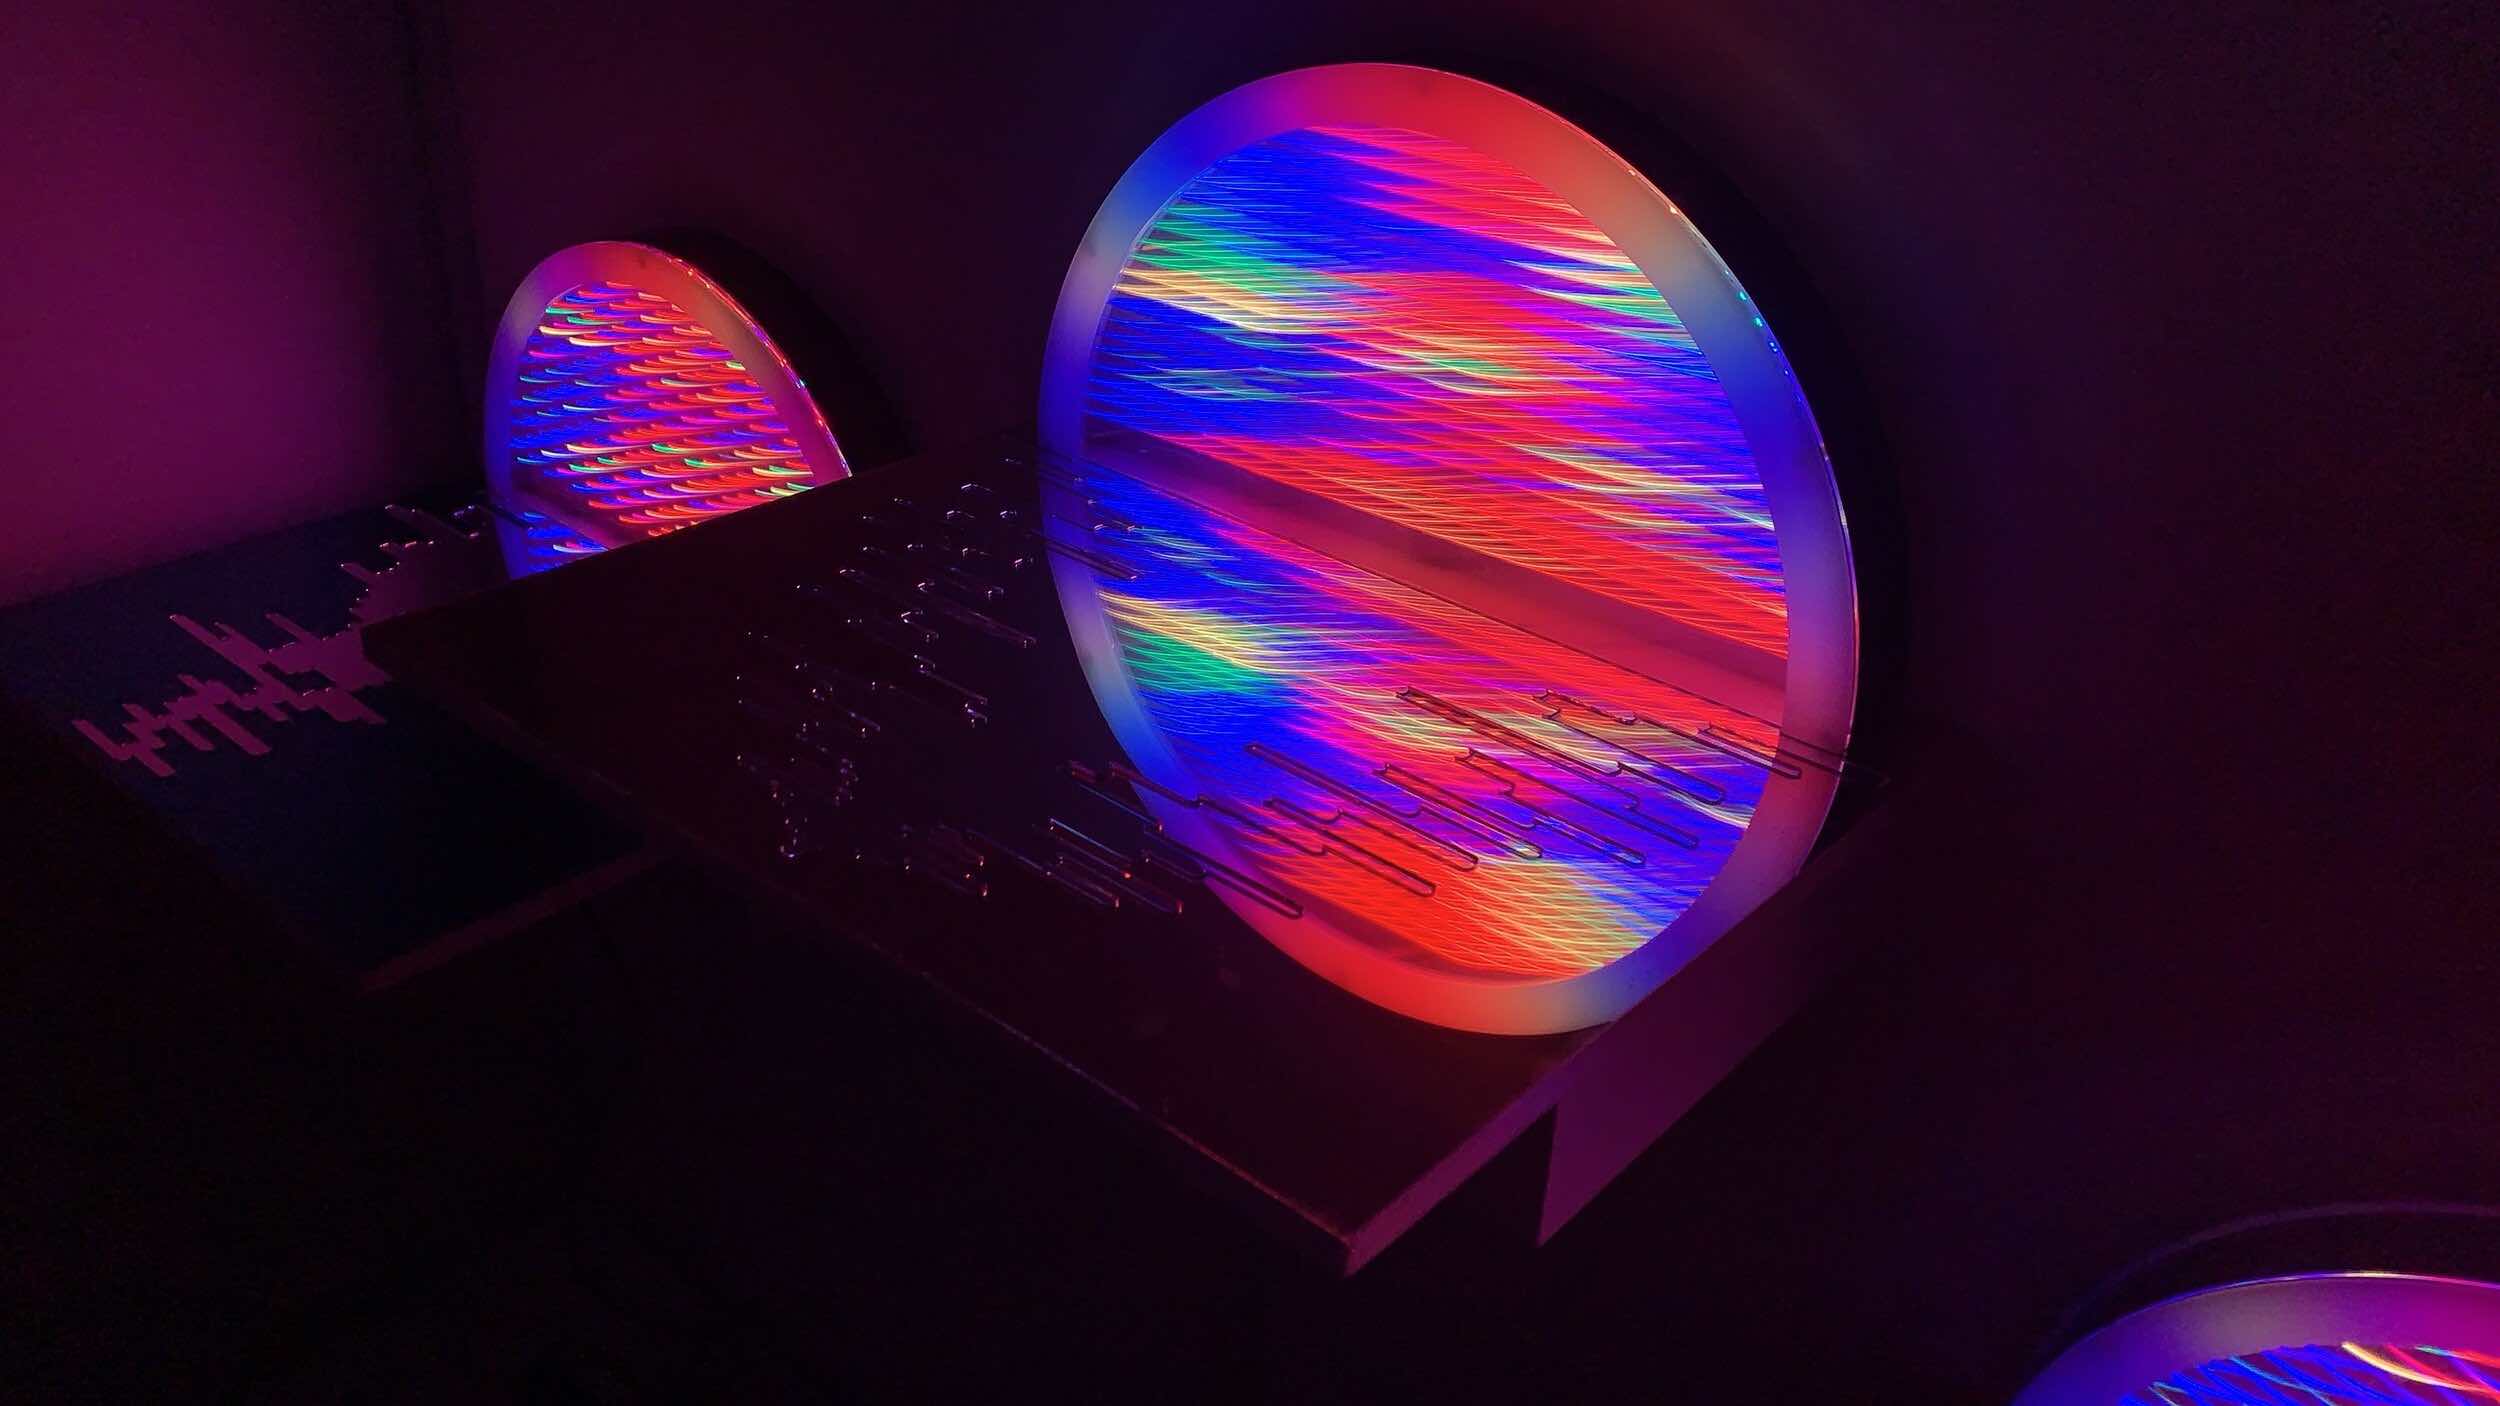 An exploration of the lenticular lens behind led screens